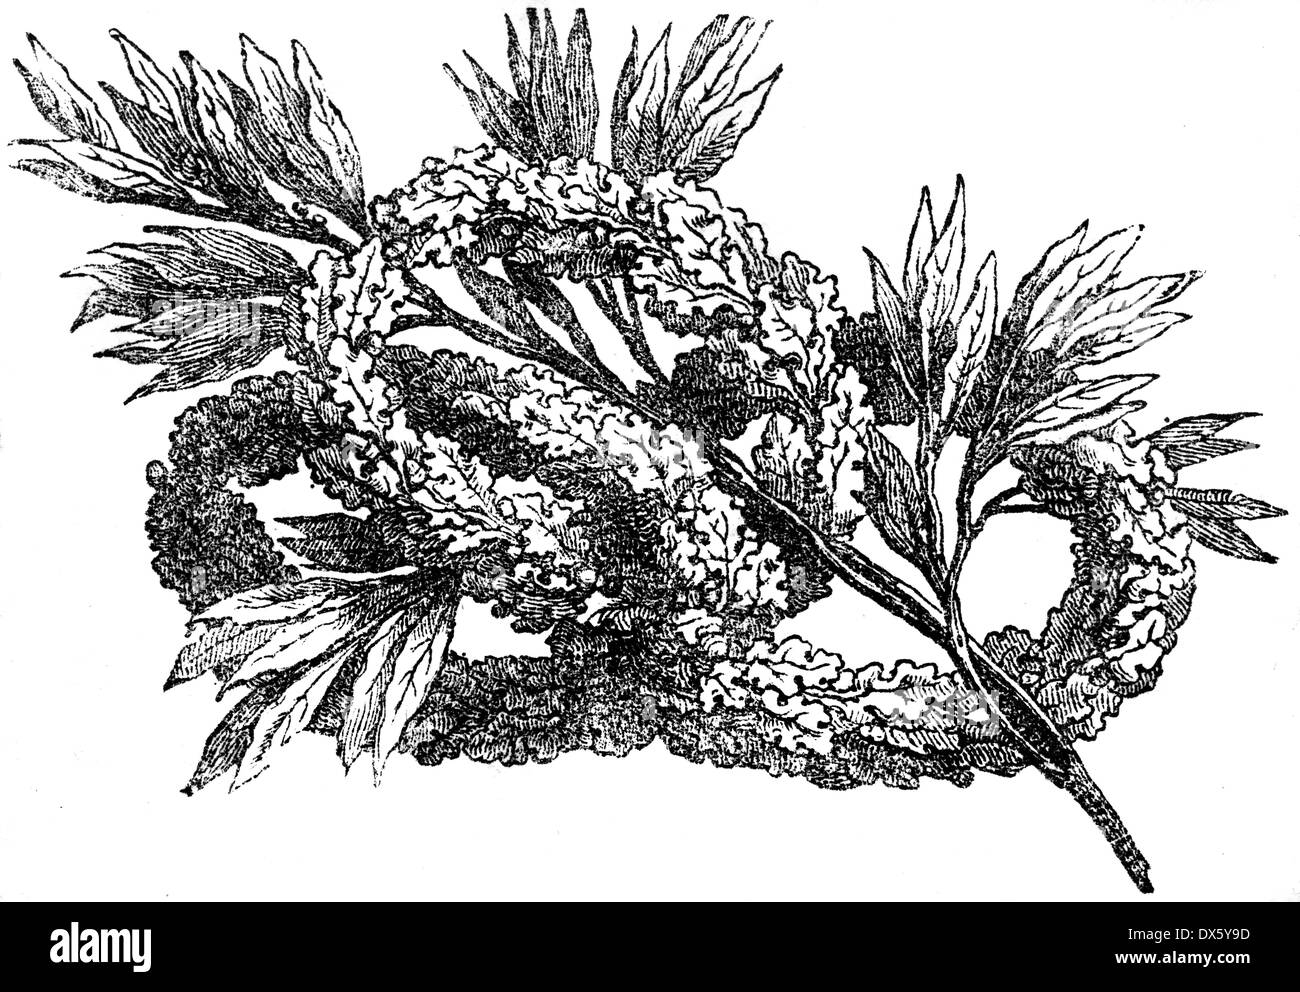 Laurel branch and wreath, illustration from book dated 1878 Stock Photo